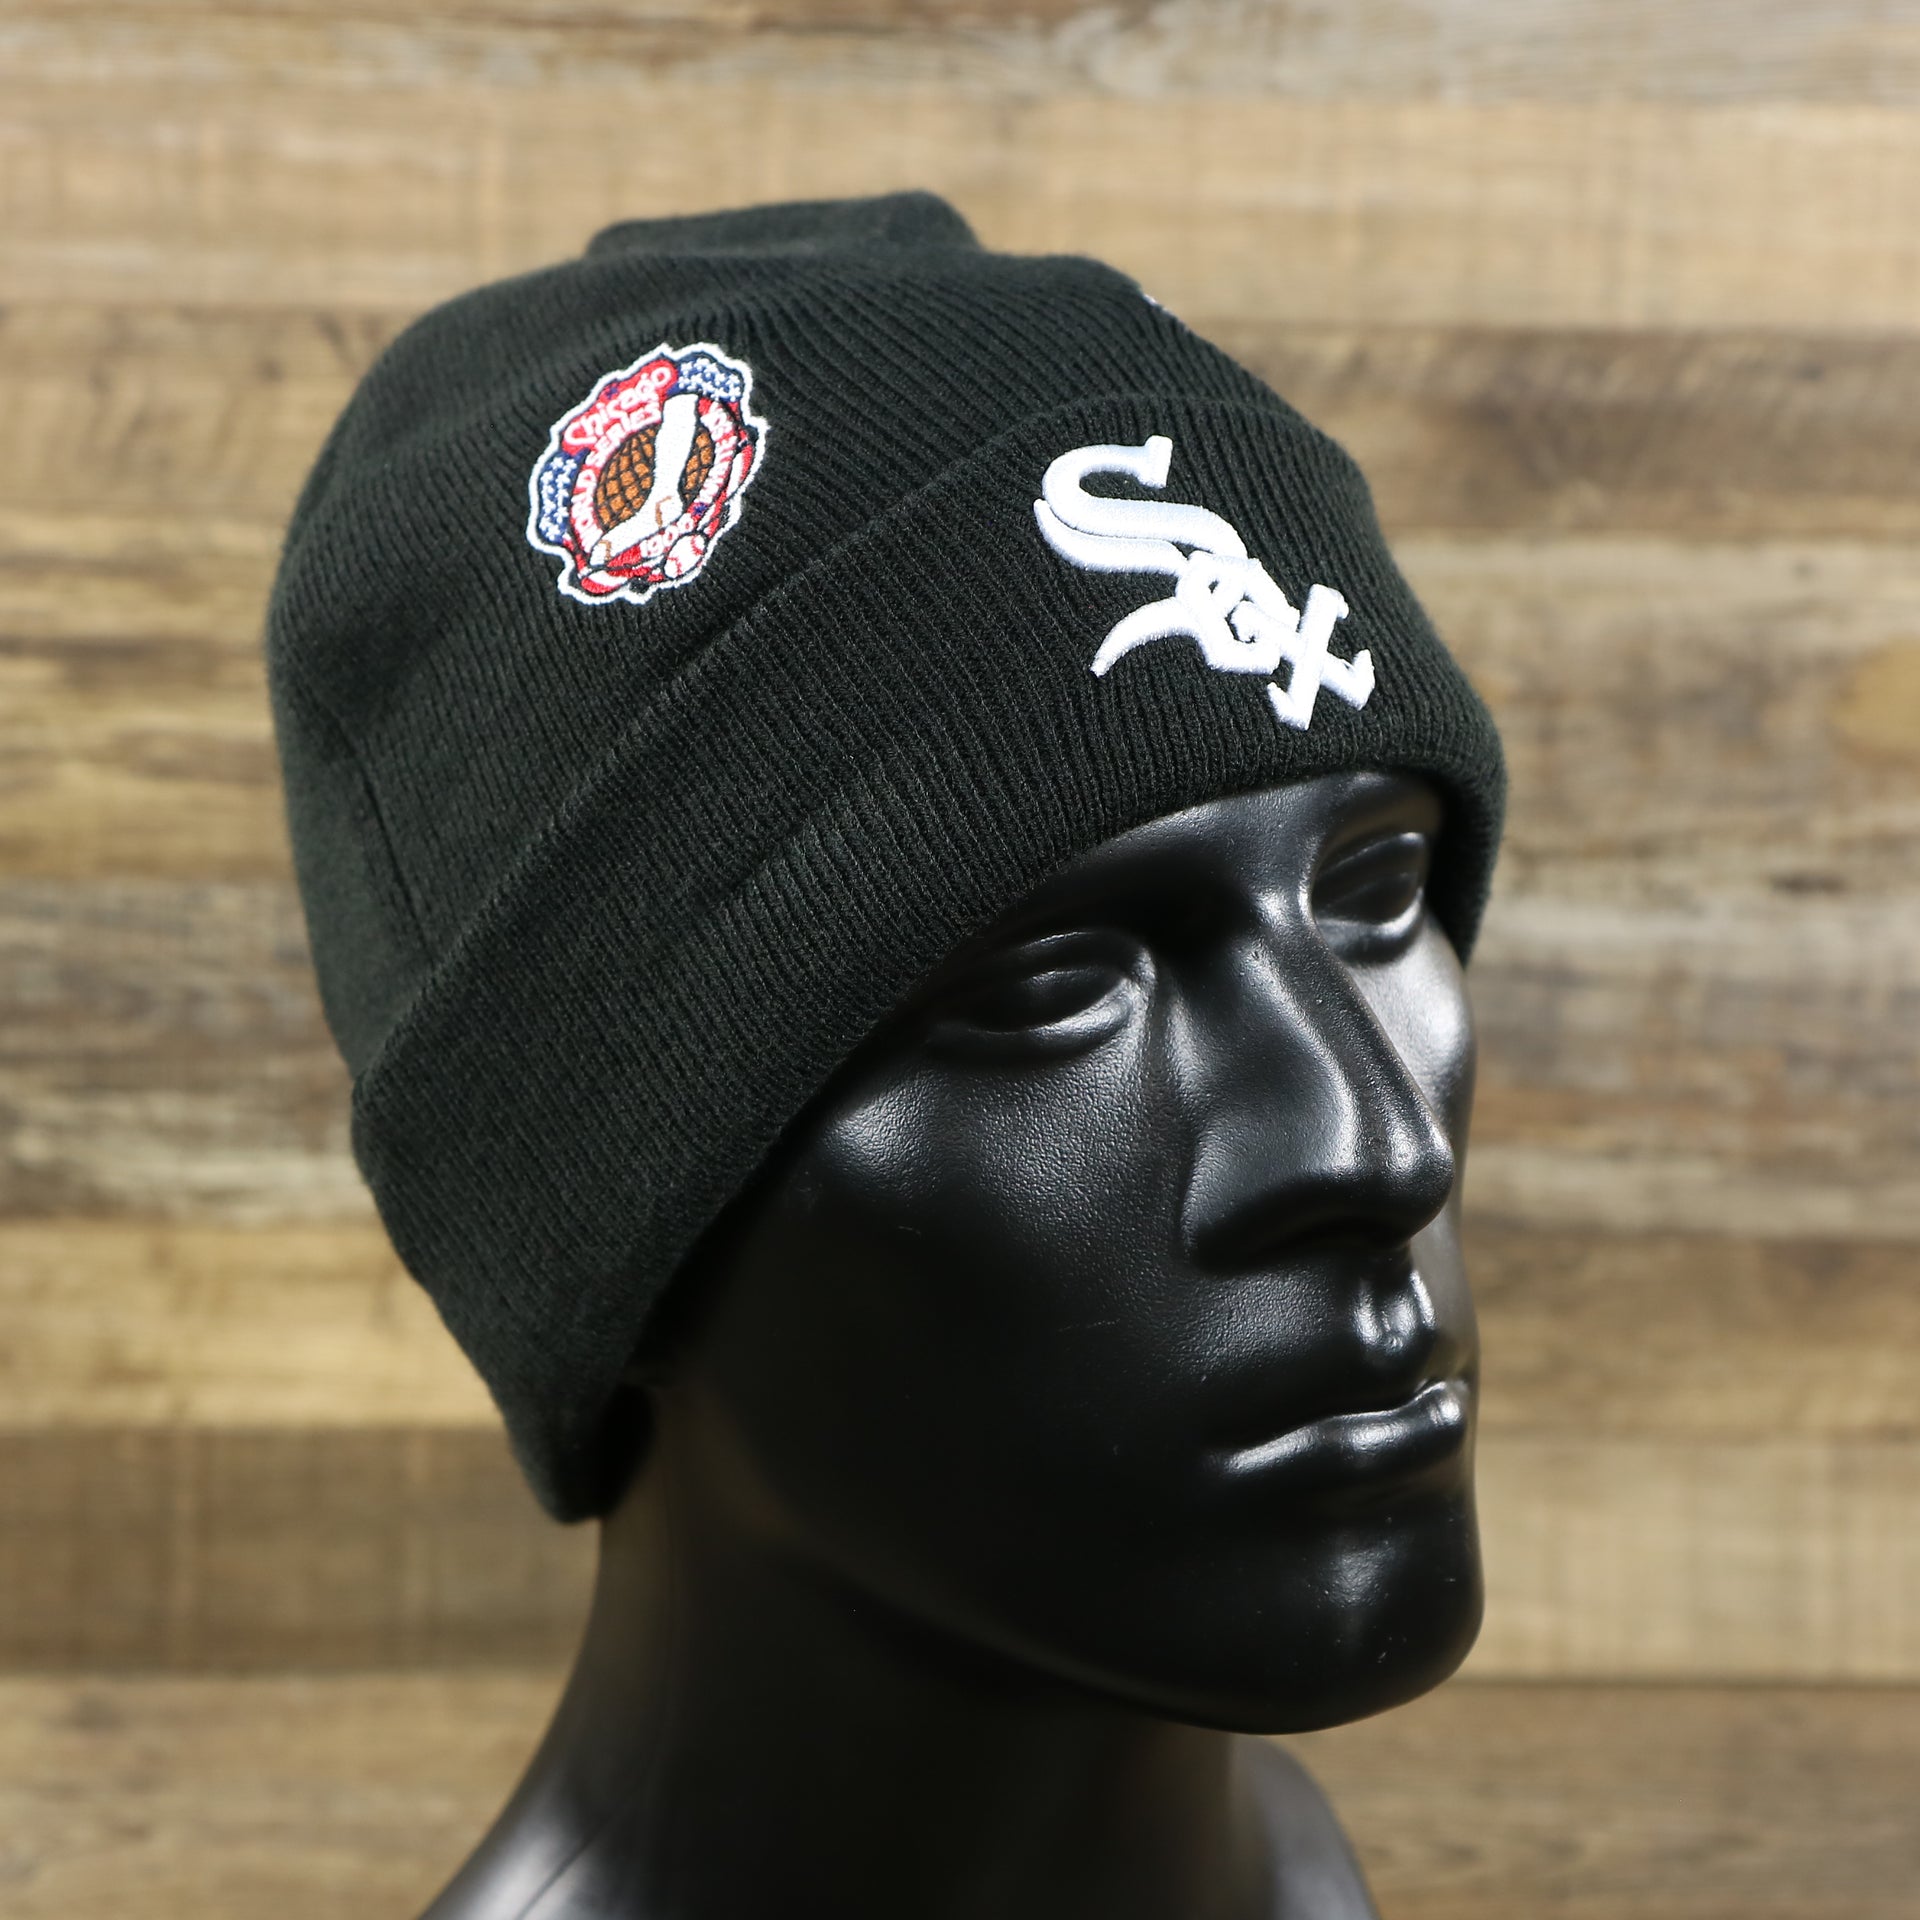 The Chicago White Sox All Over World Series Side Patch 3x Champion Knit Cuff Beanie | New Era, Black